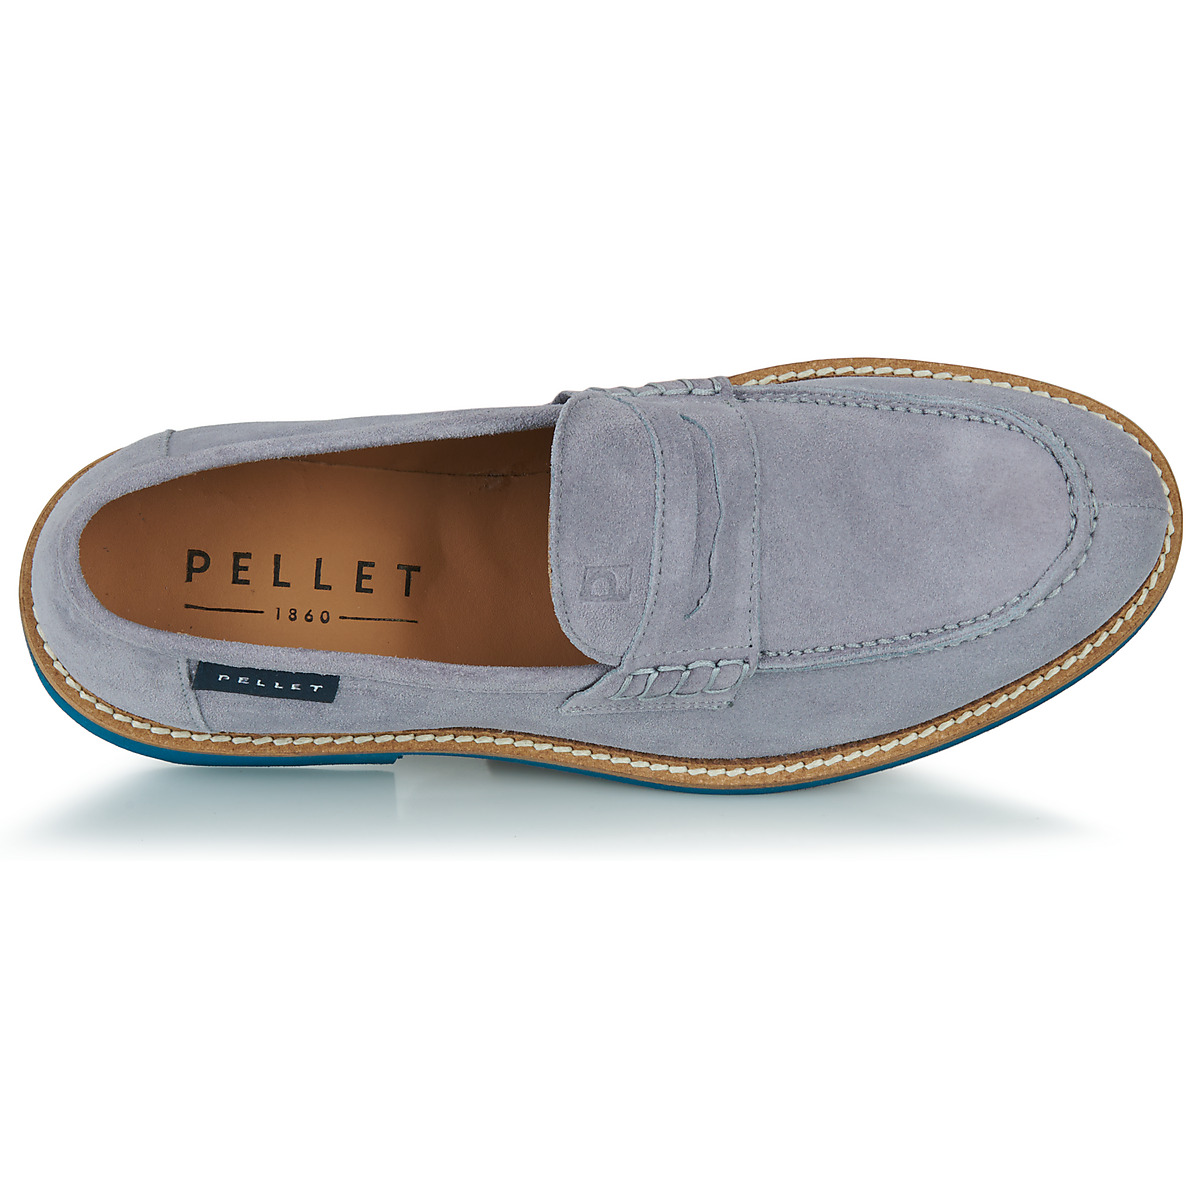 Pellet VELOURS GRIS CLEMENT oh9oicSy